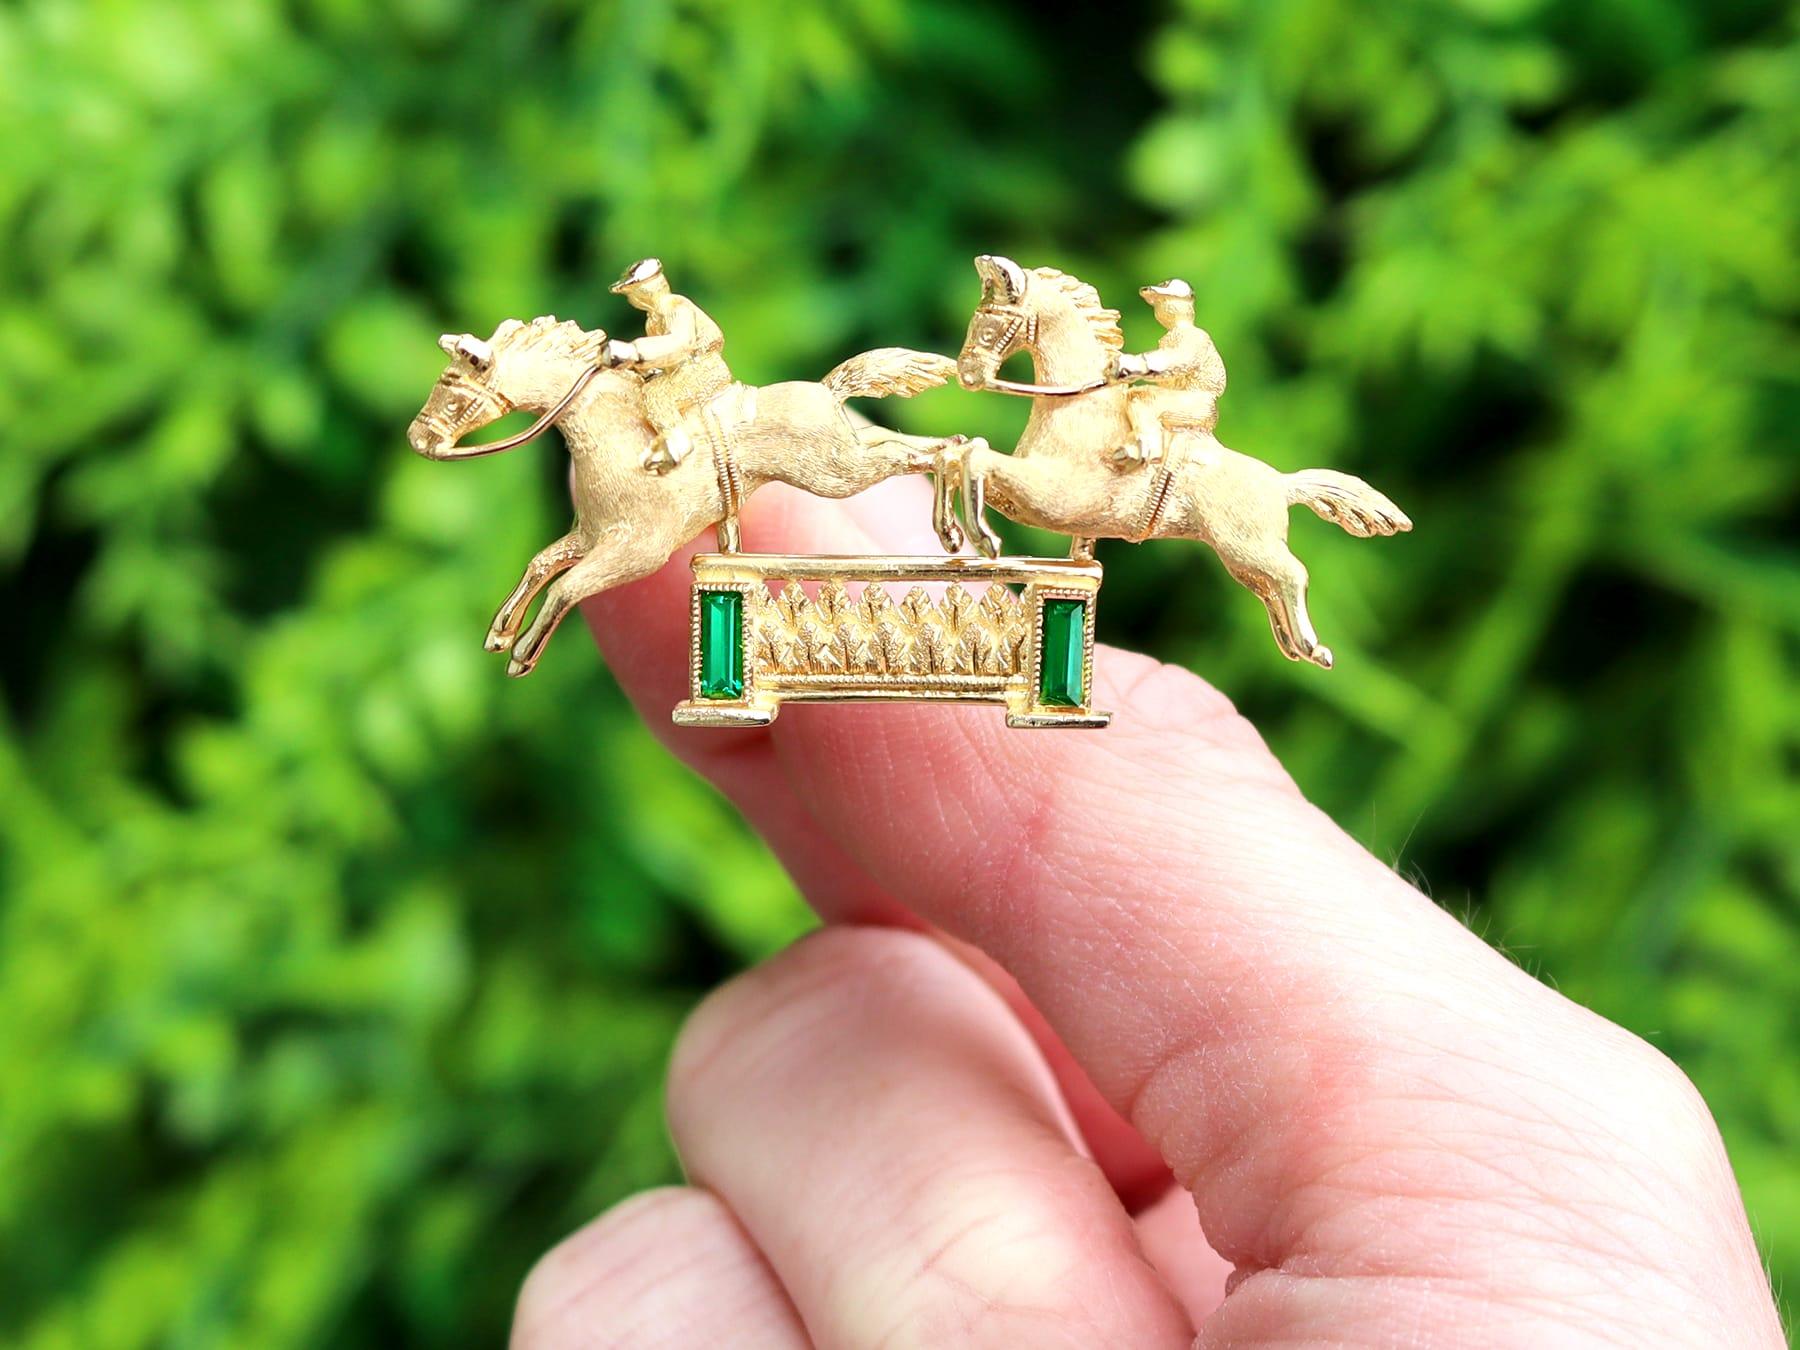 A fine and impressive vintage 0.50 carat green tourmaline and 18 karat yellow gold double horse and jockey brooch; part of our diverse vintage horse jewelry collections.

This fine and impressive vintage brooch has been crafted in 18k yellow